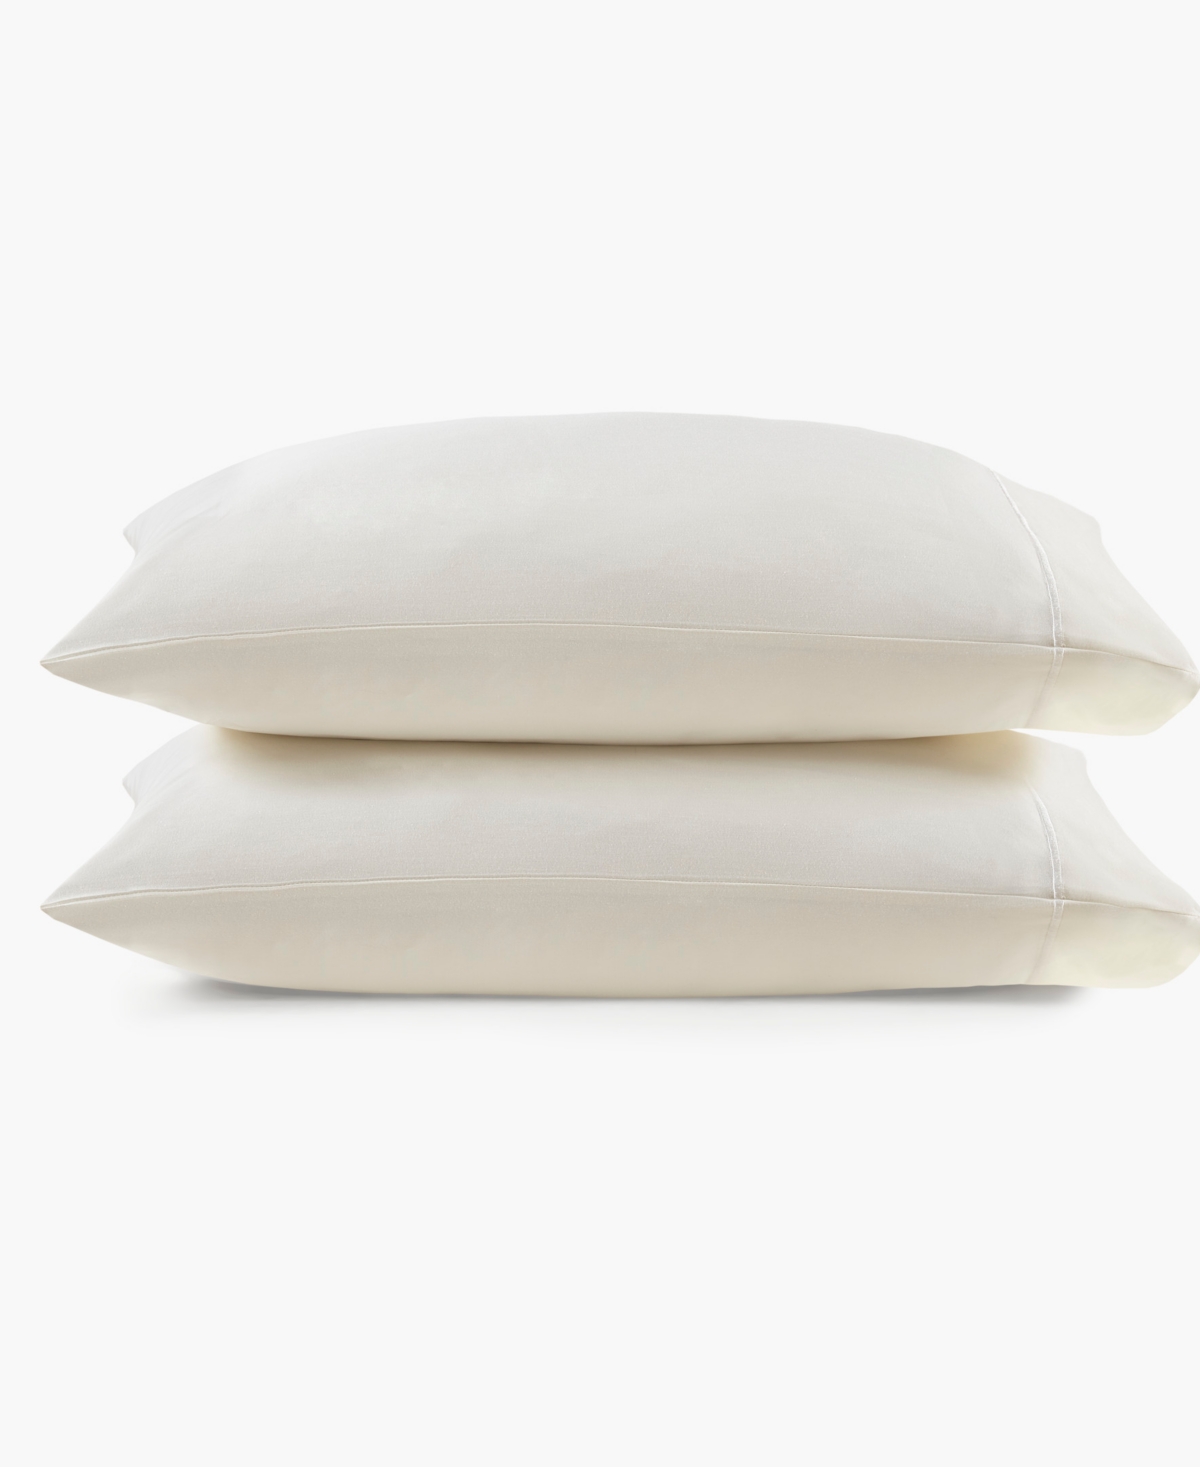 Croscill 500 Thread Count Egyptian Cotton Pillowcases, Standard In Ivory